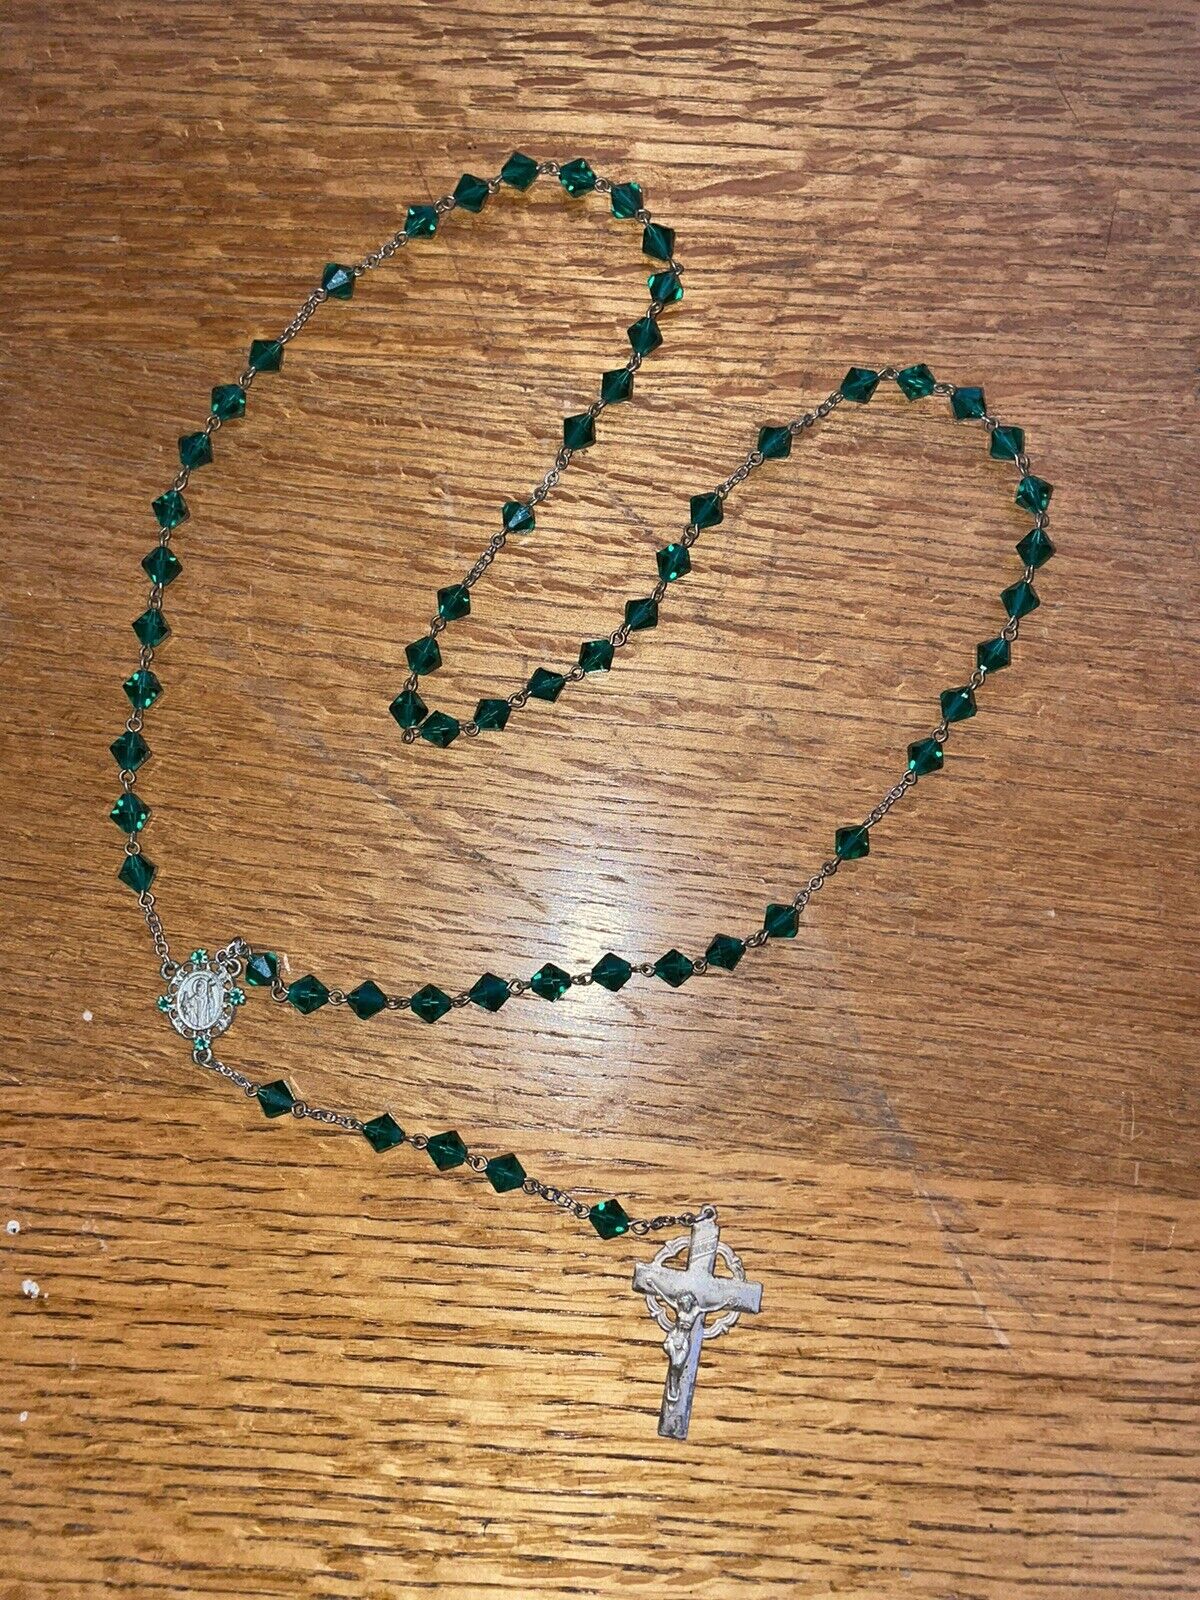 Vintage Handmade Green Rosary With Painted Accents Blessed By Catholic Priest